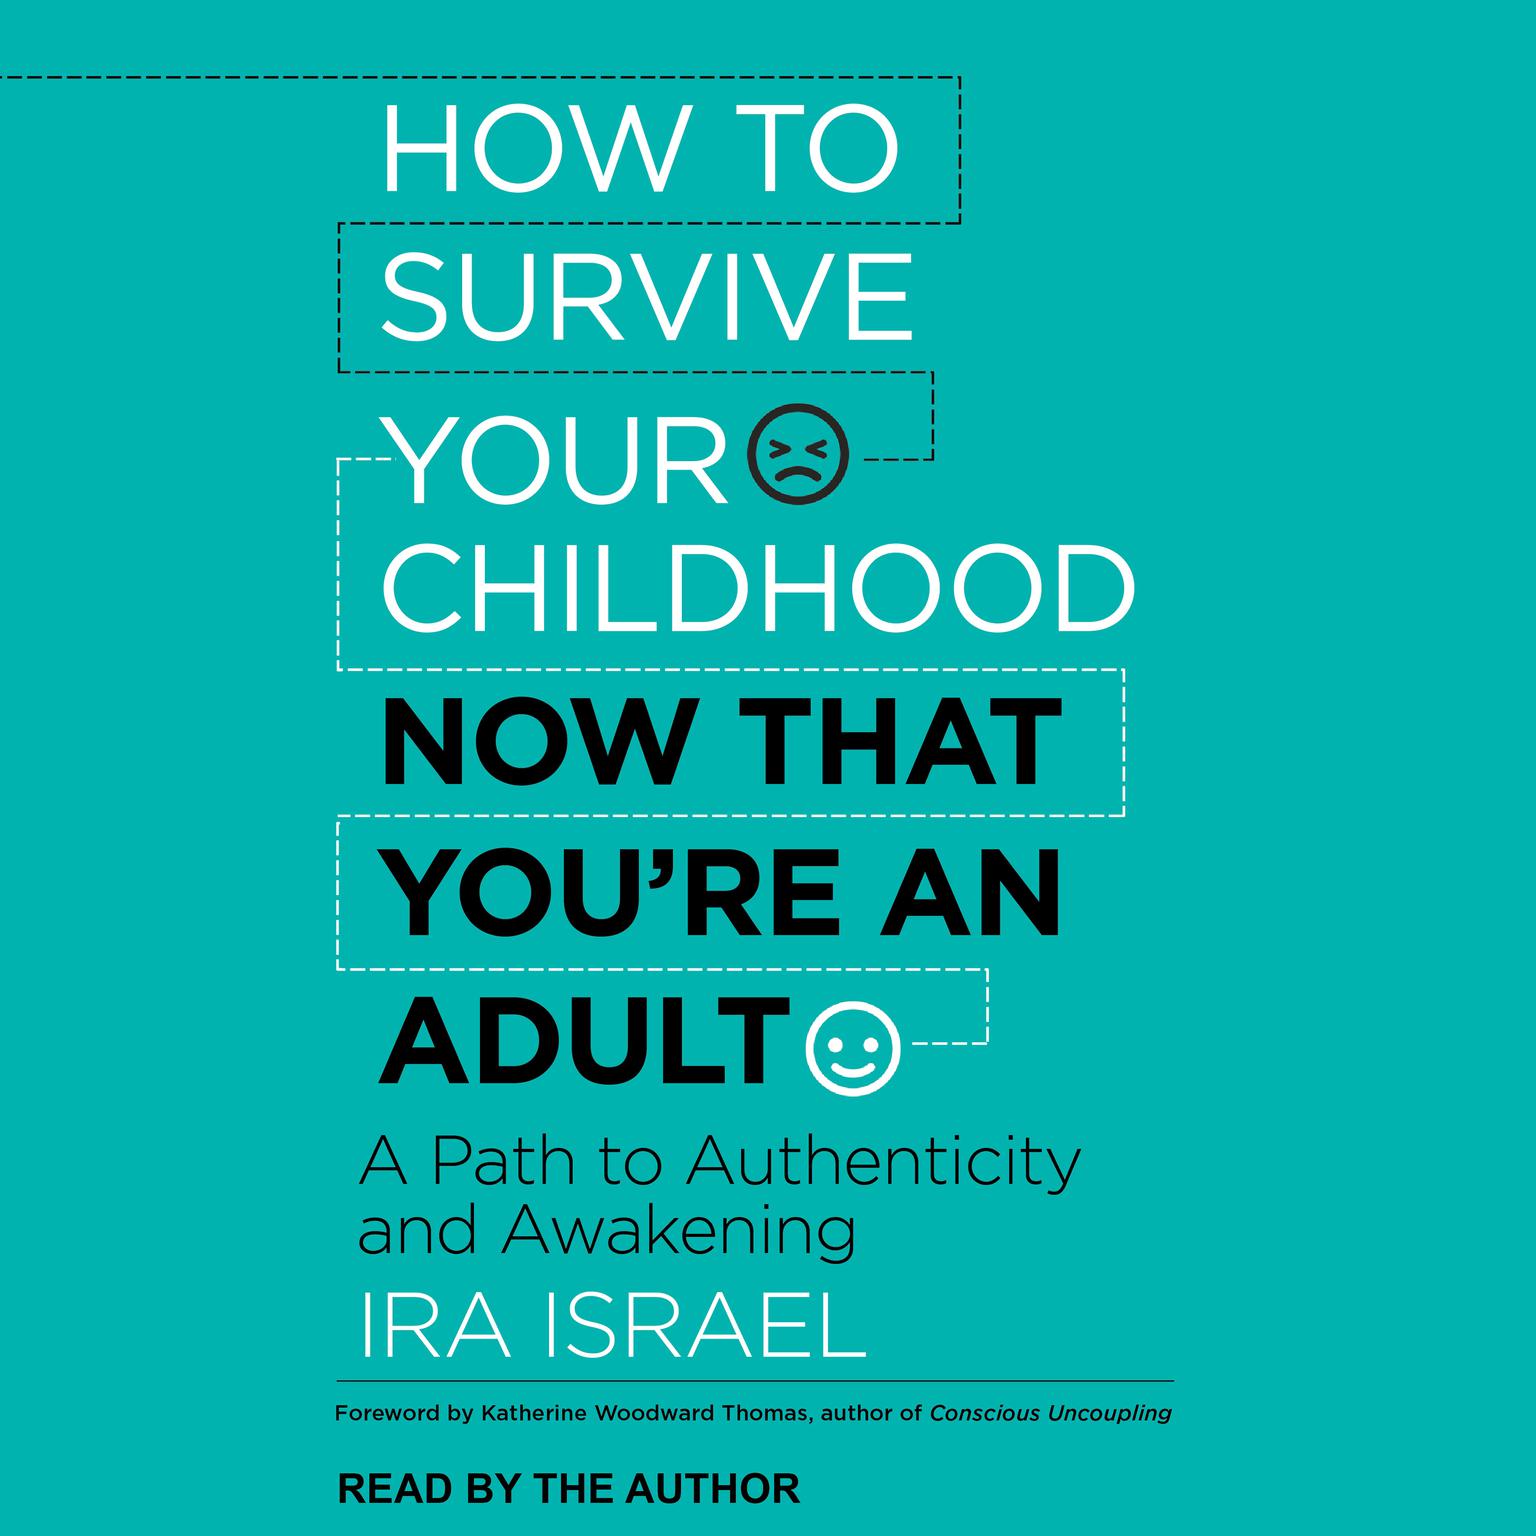 How to Survive Your Childhood Now That Youre an Adult: A Path to Authenticity and Awakening Audiobook, by Ira Israel